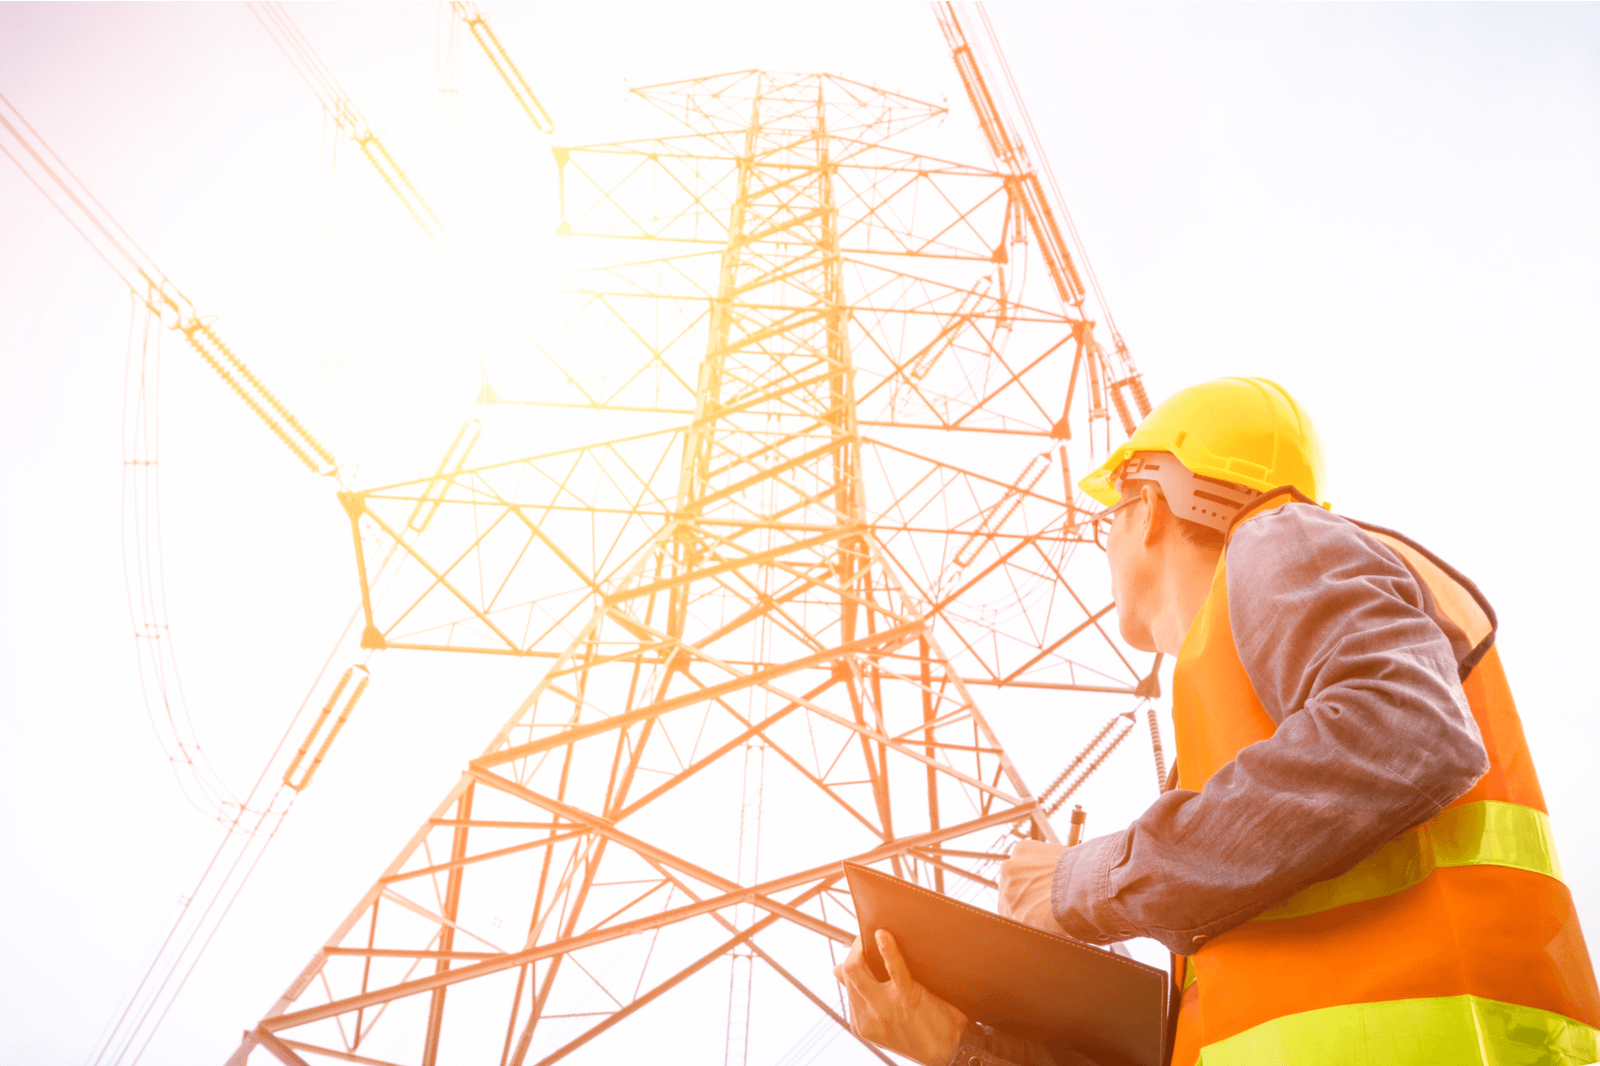 Man looking up at electrical lines on tower